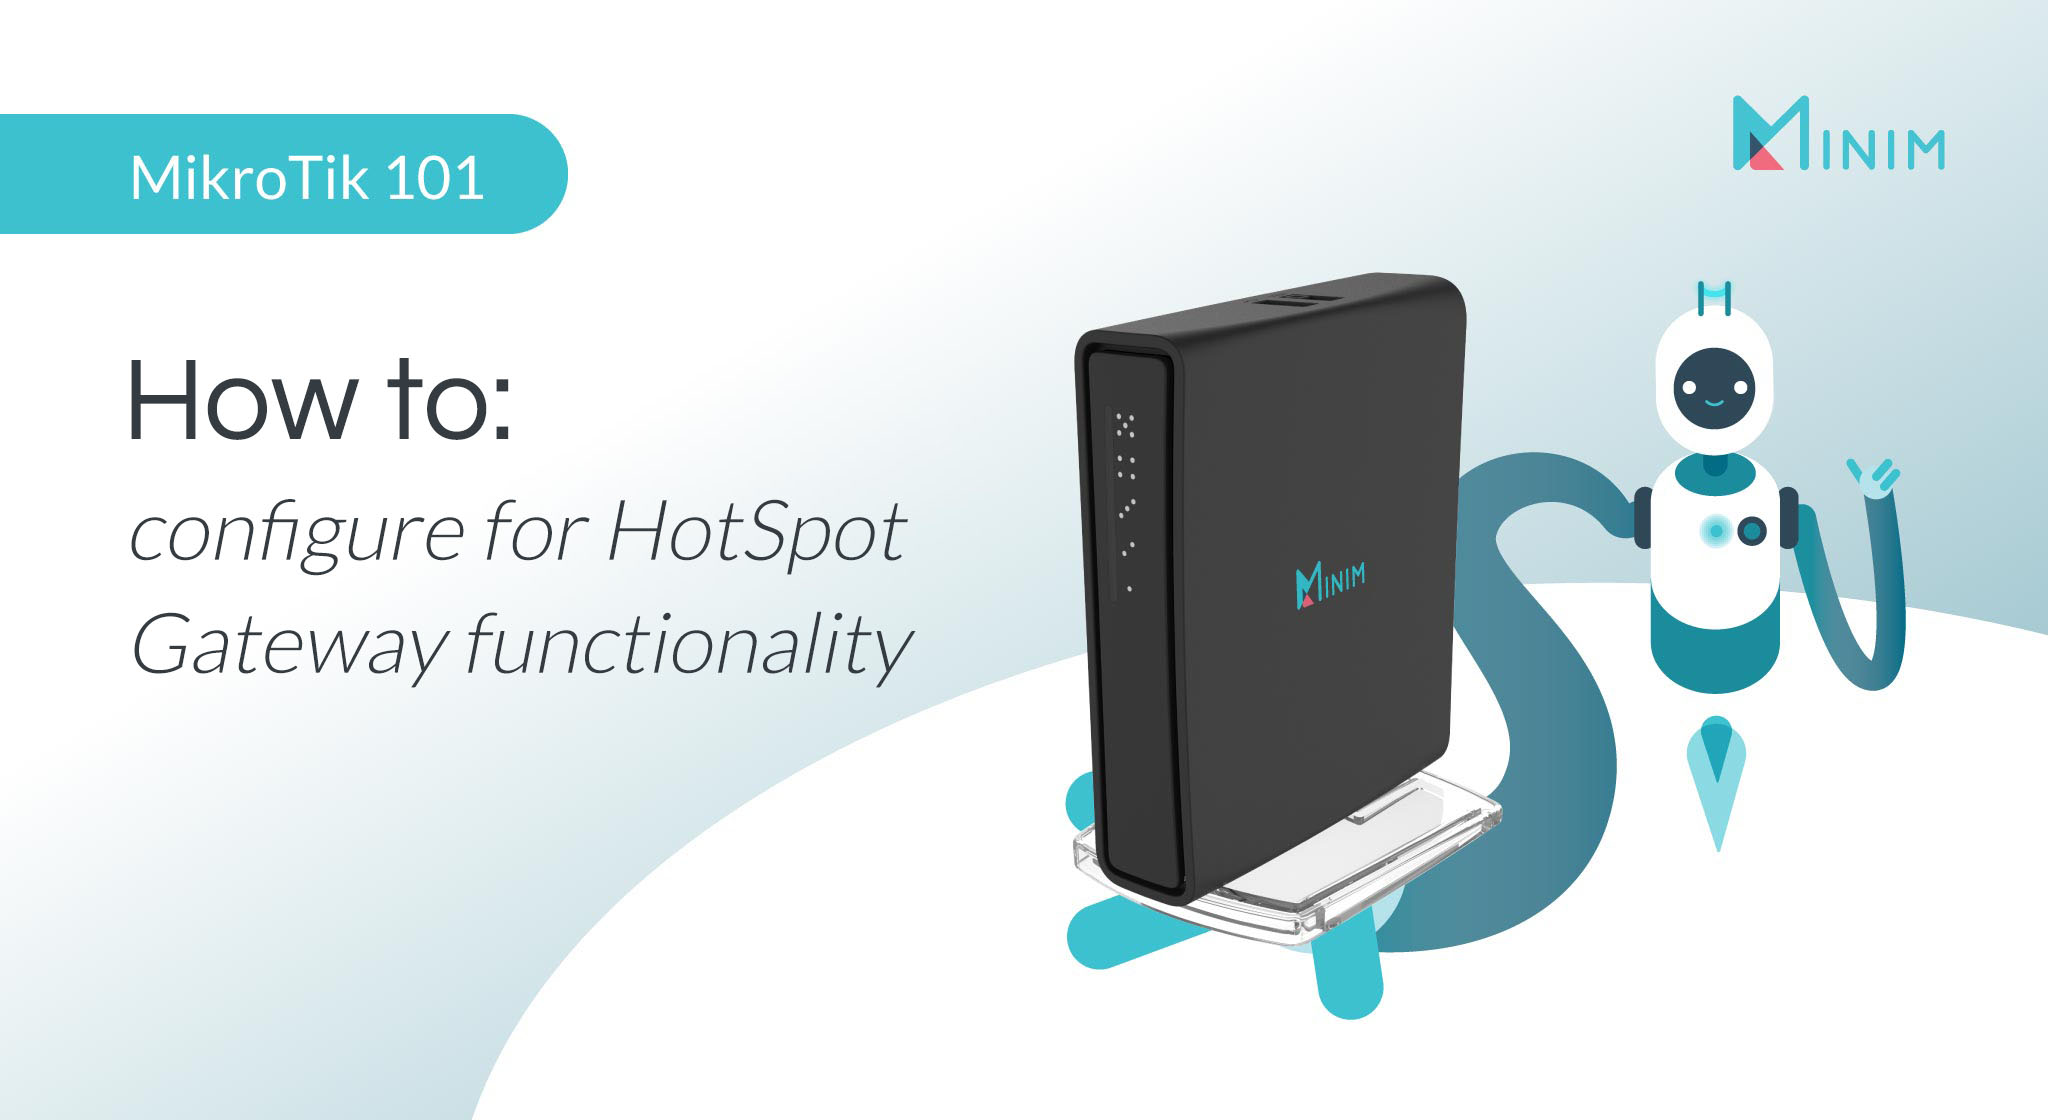 How to configure a MikroTik router for HotSpot gateway functionality